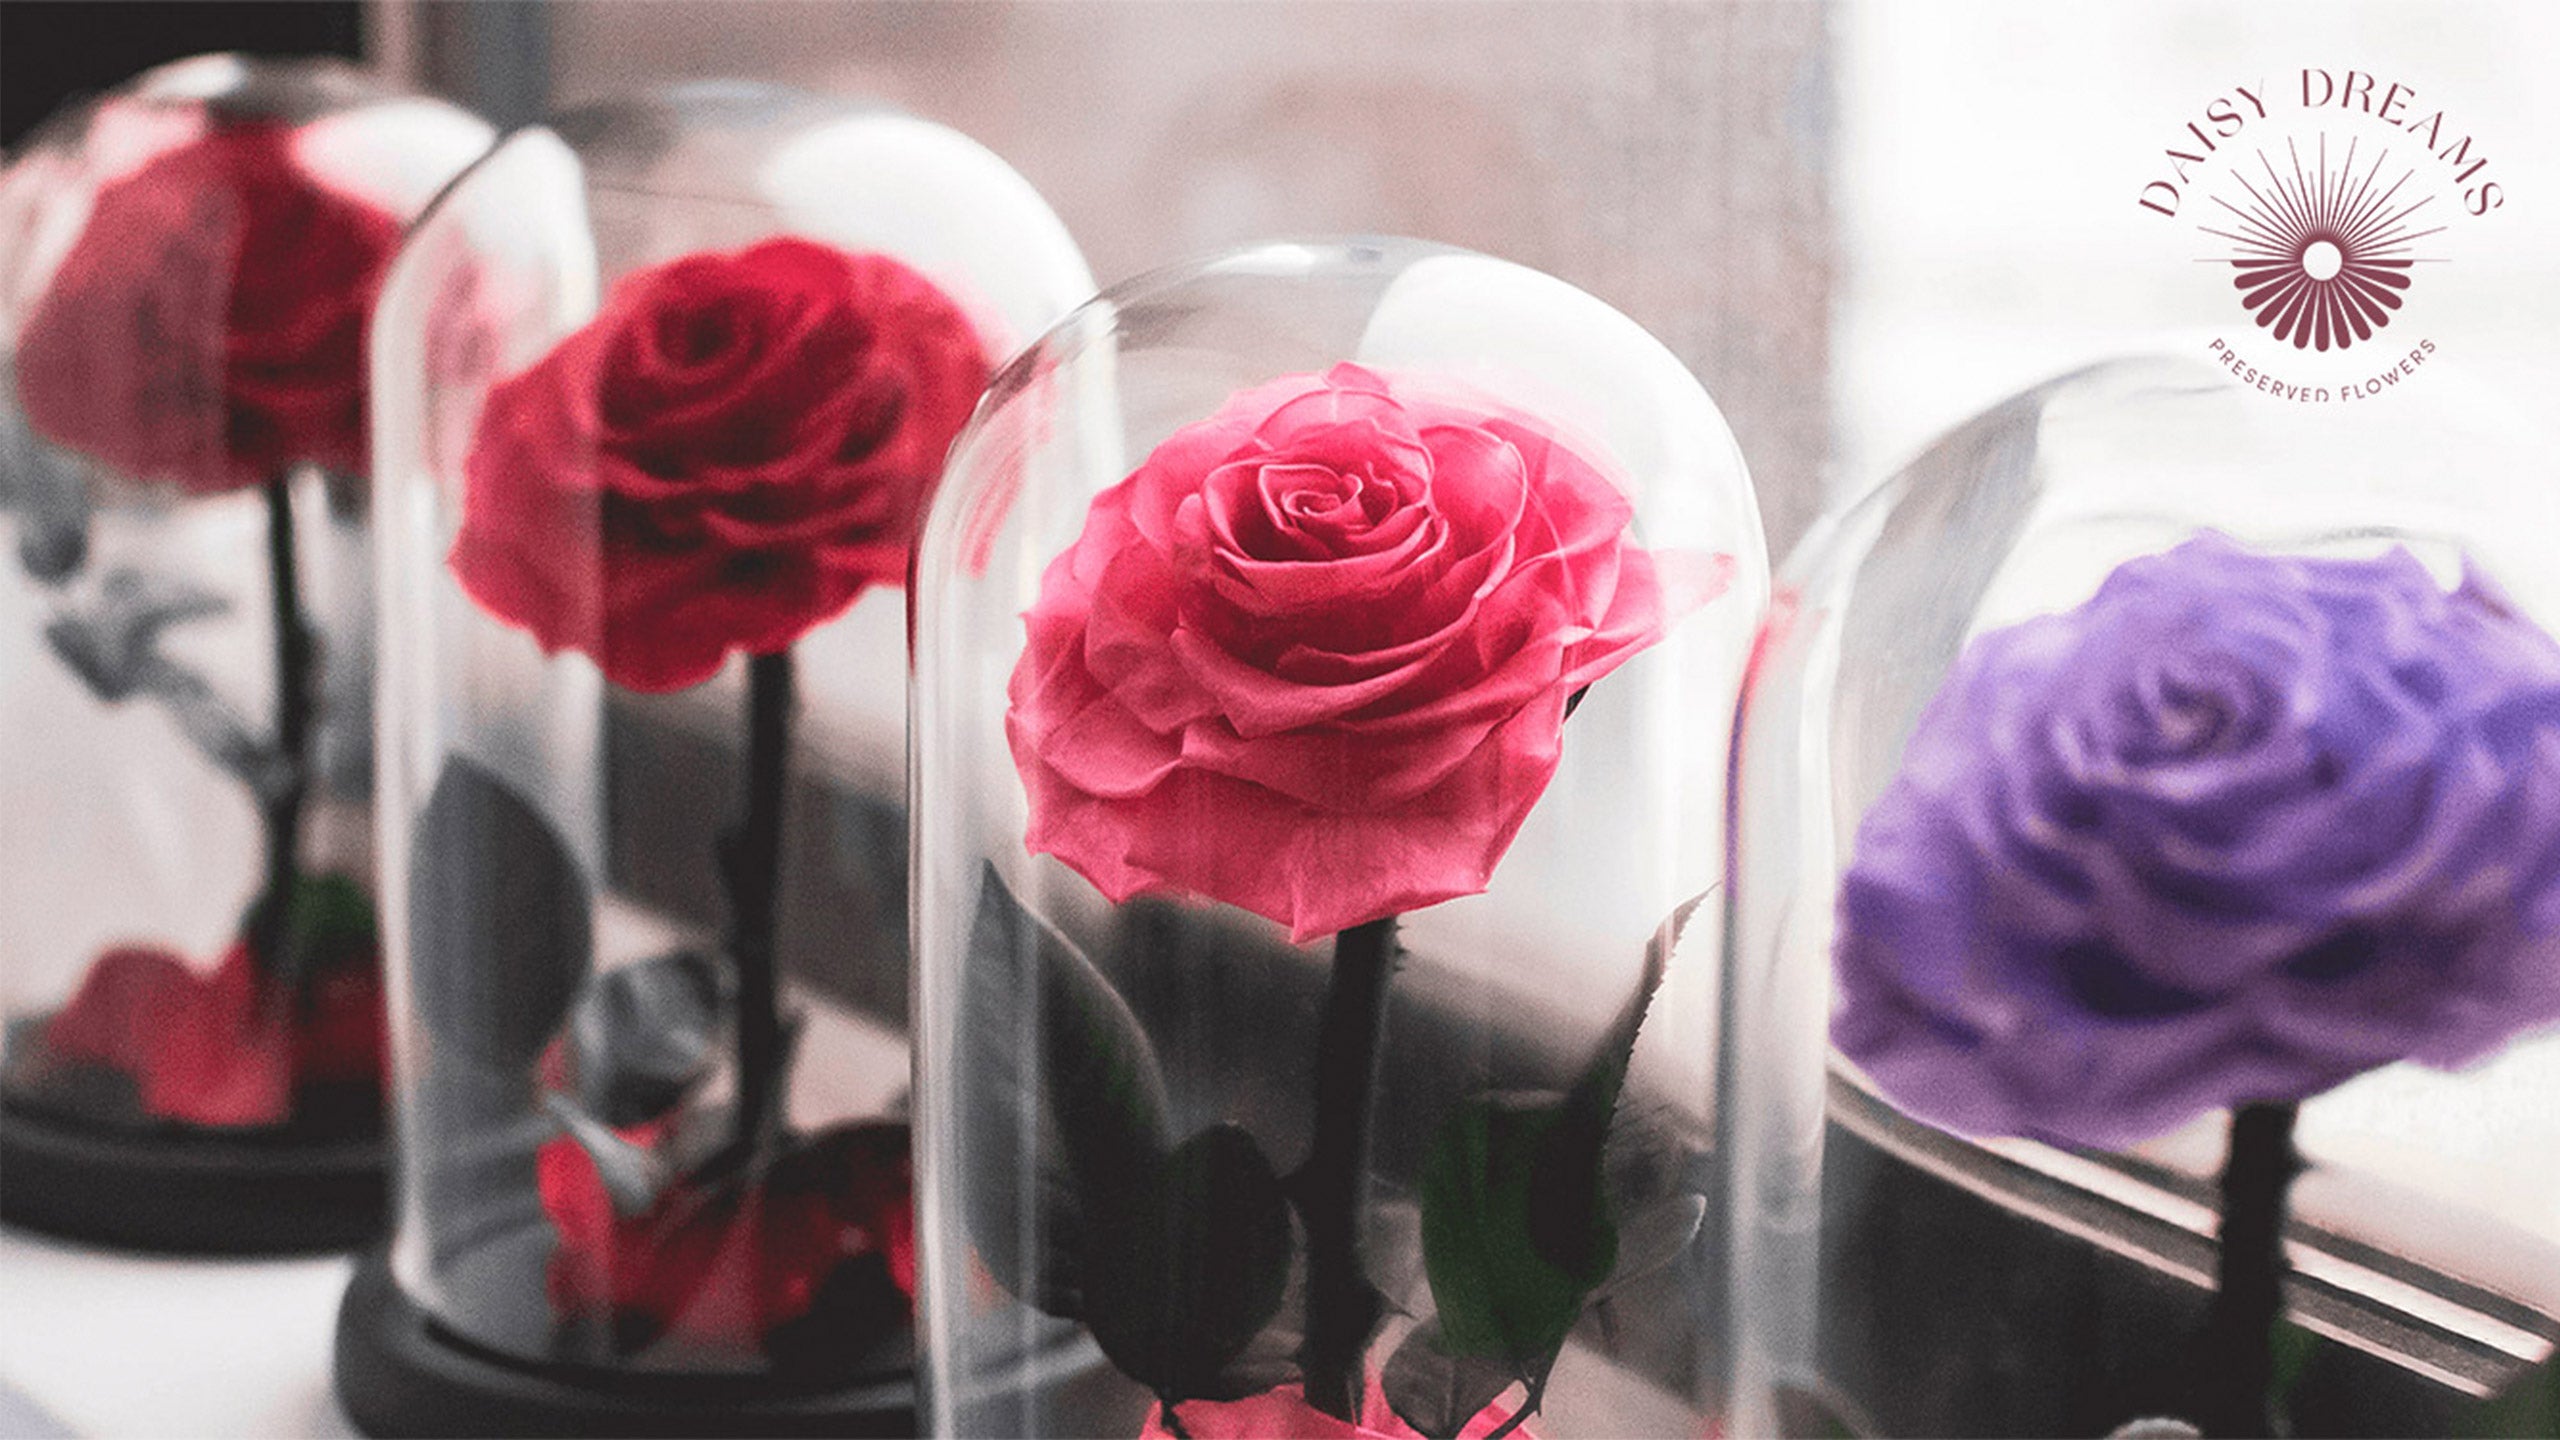 Last Minute Valentine's Day Gift Idea: Same-Day Delivery of Preserved Flowers